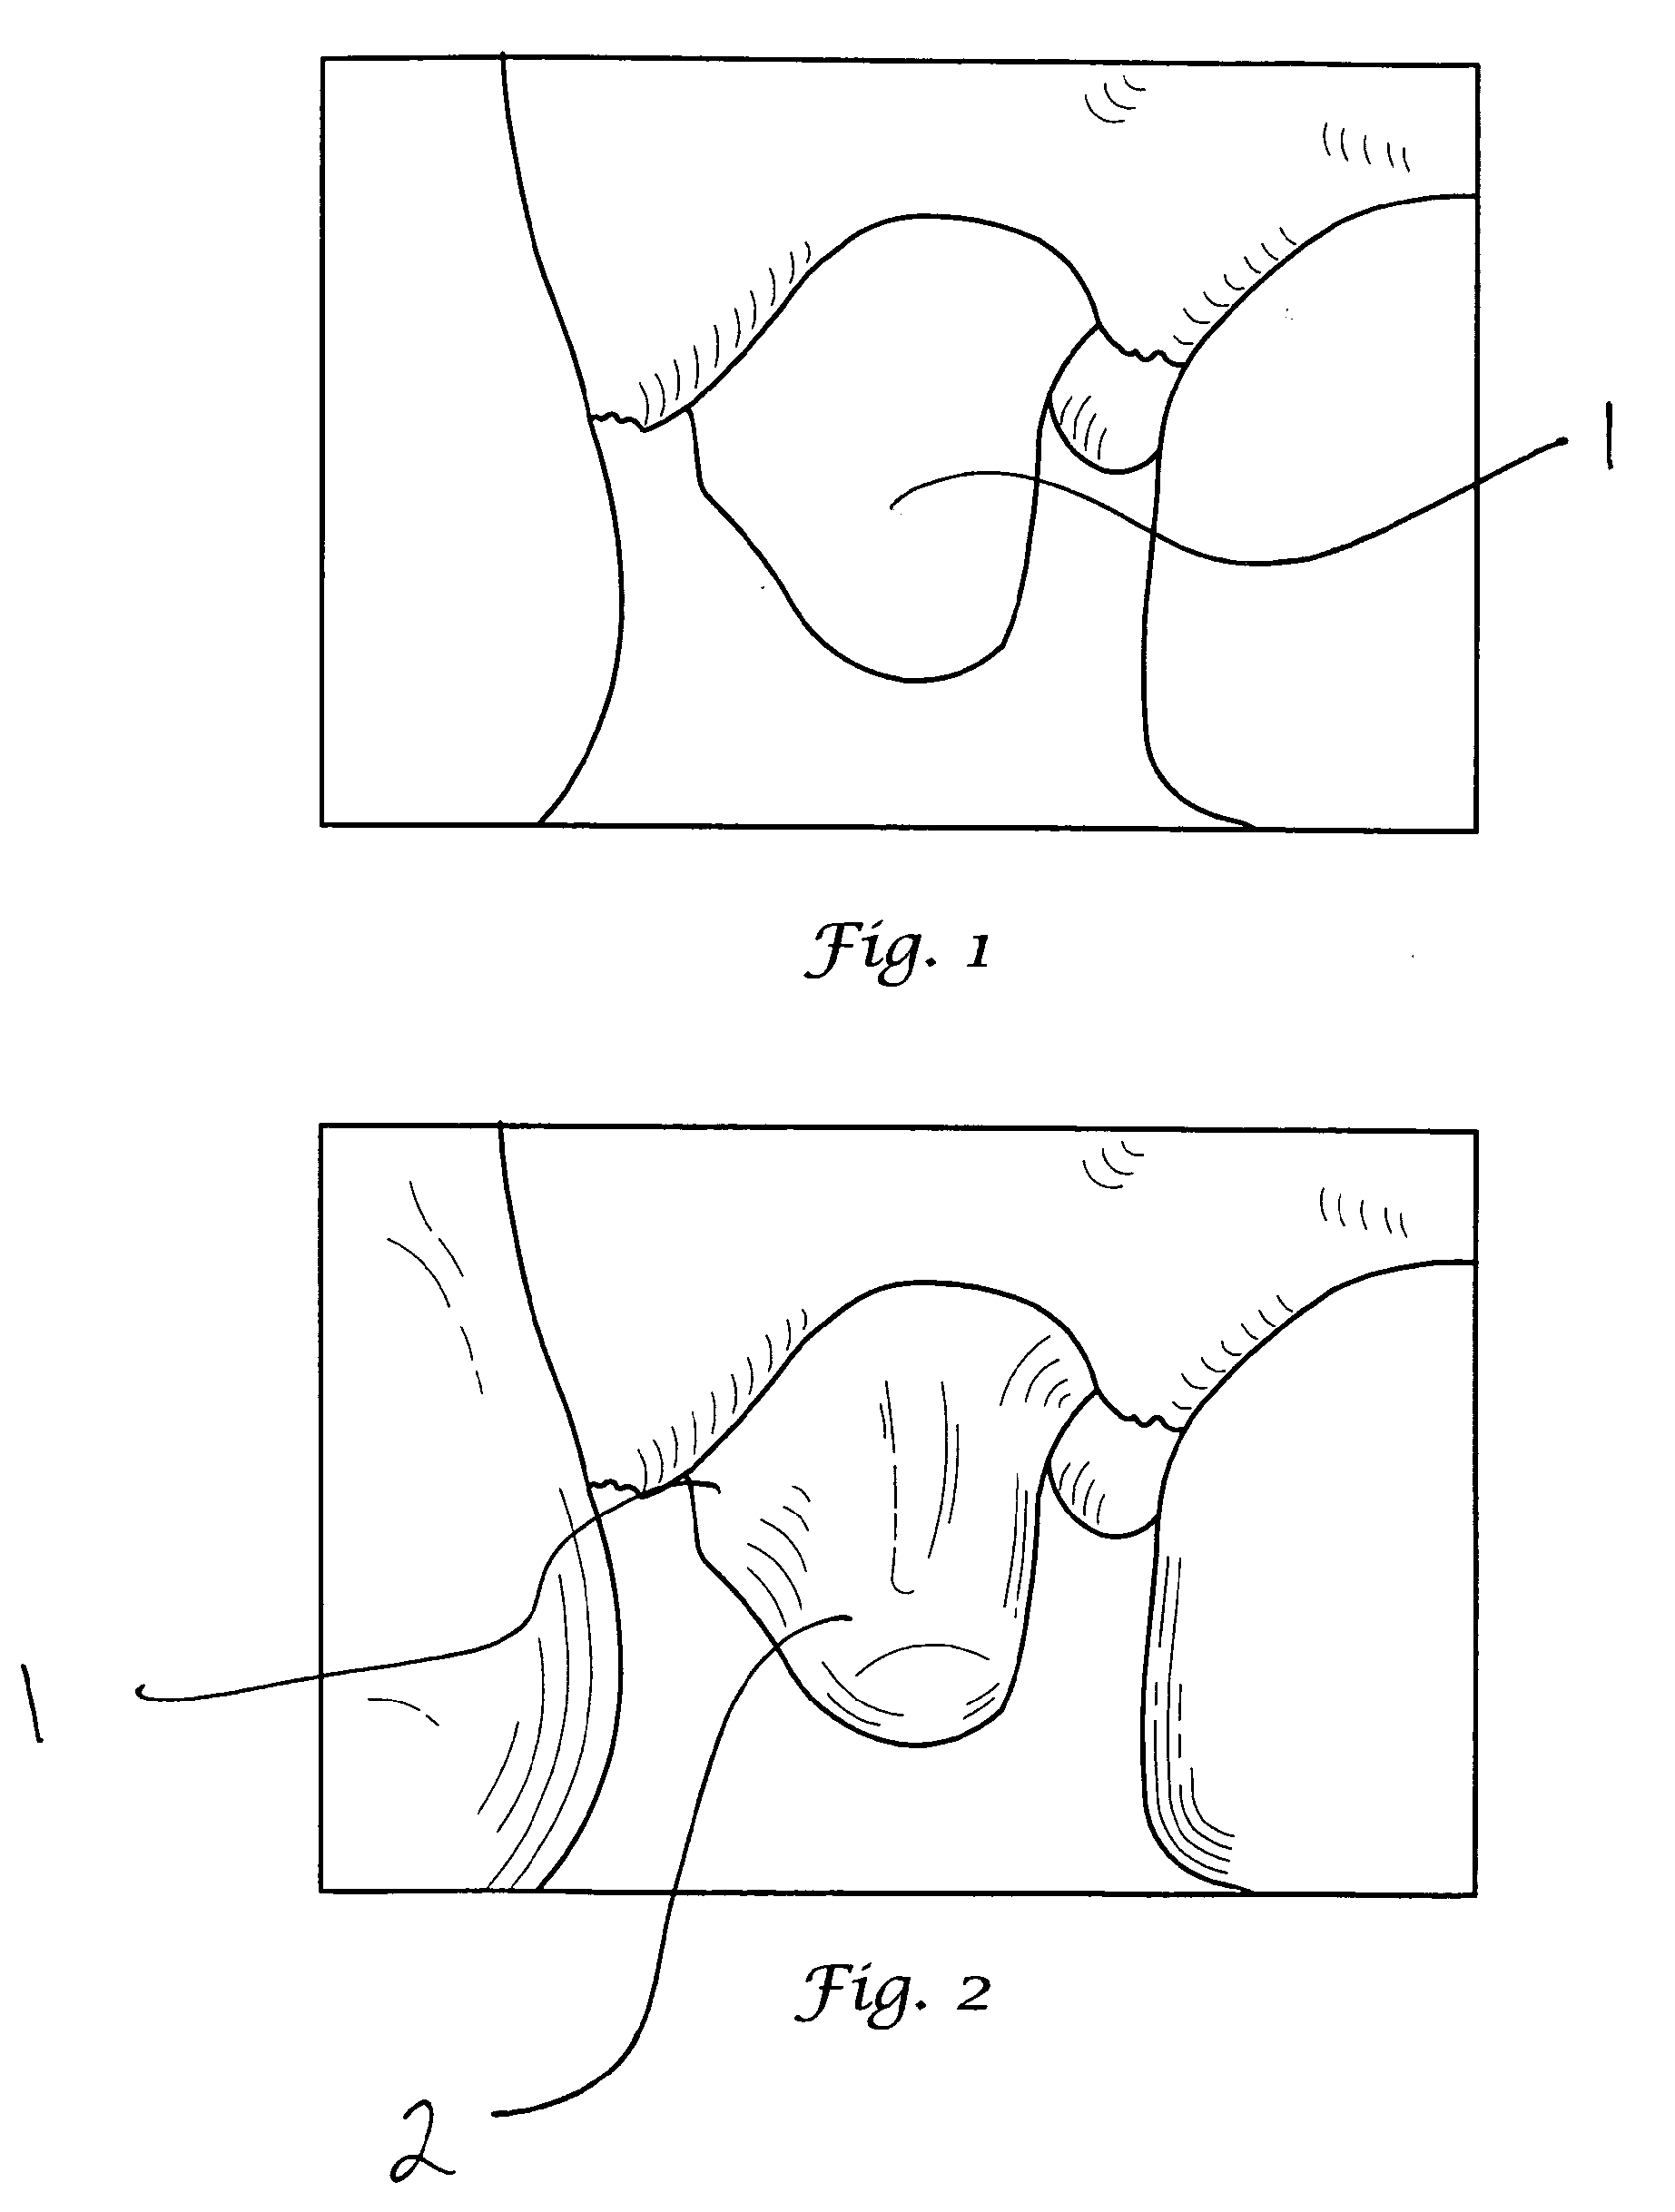 Method of preparing dentition for the taking of a dental impression